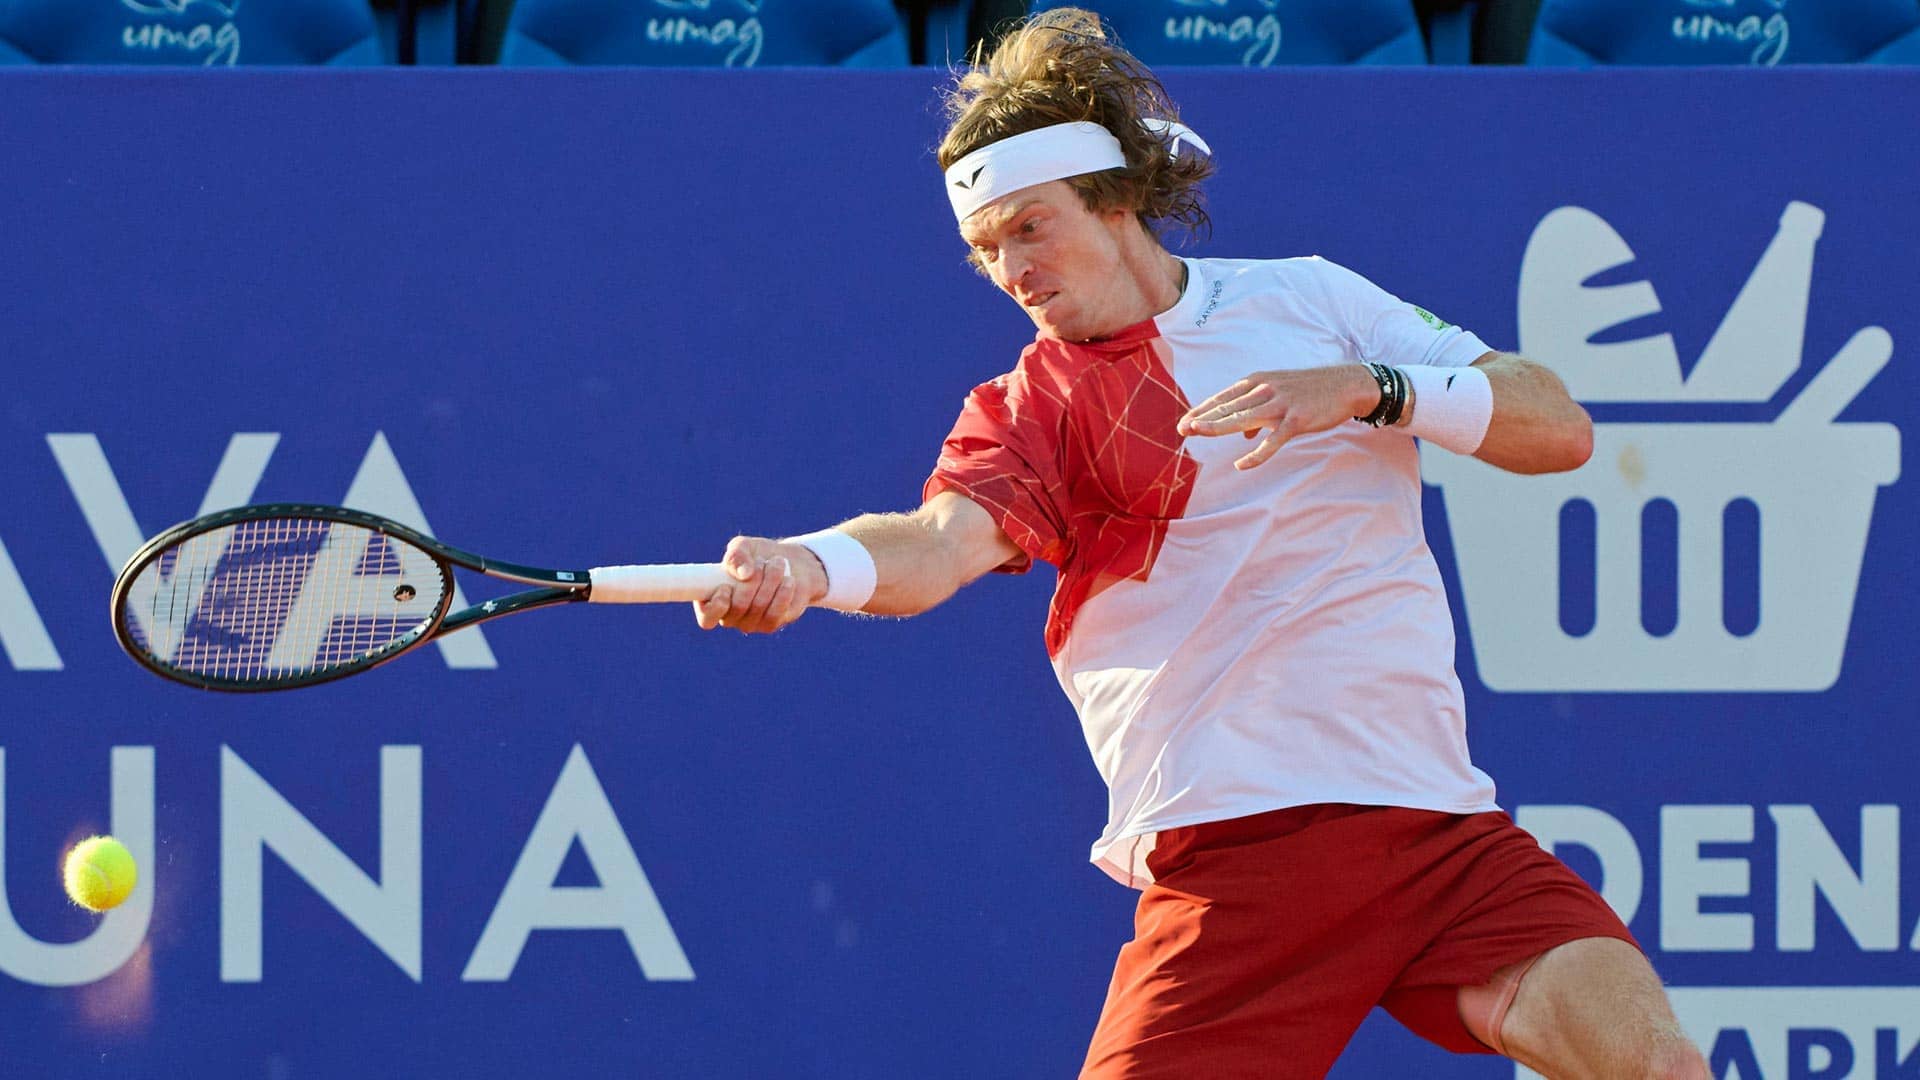 Rublev snaps skid with Umag victory